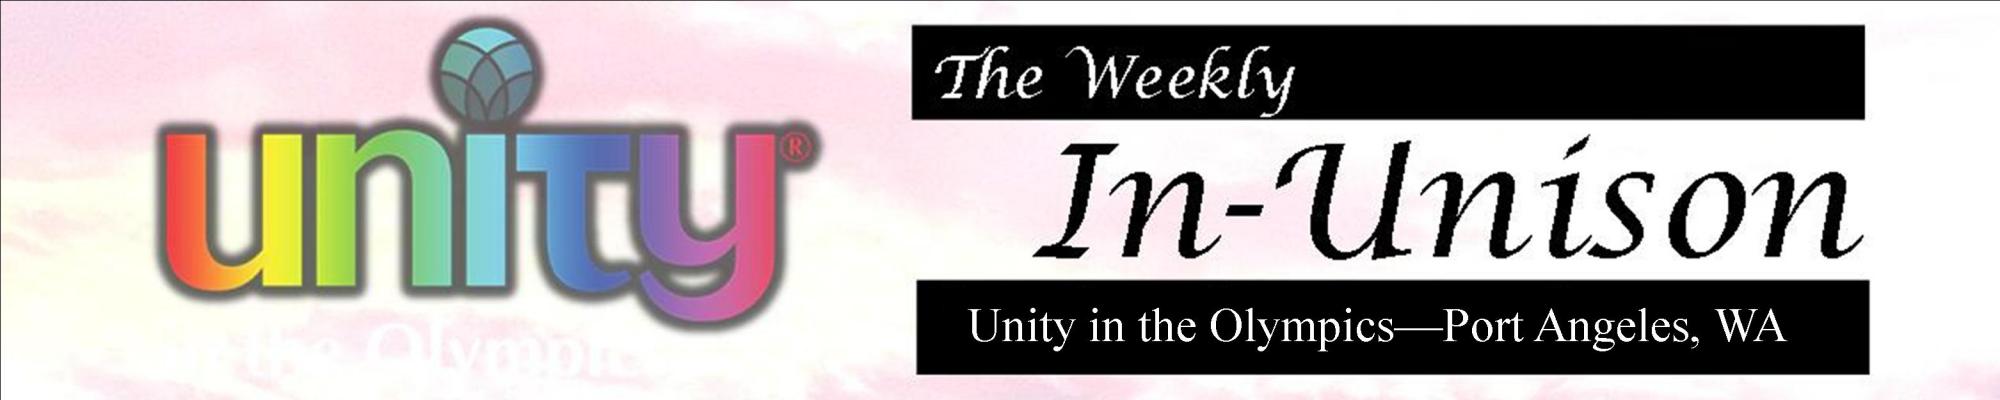 The Weekly IN-UNISOM January 3rd Edition